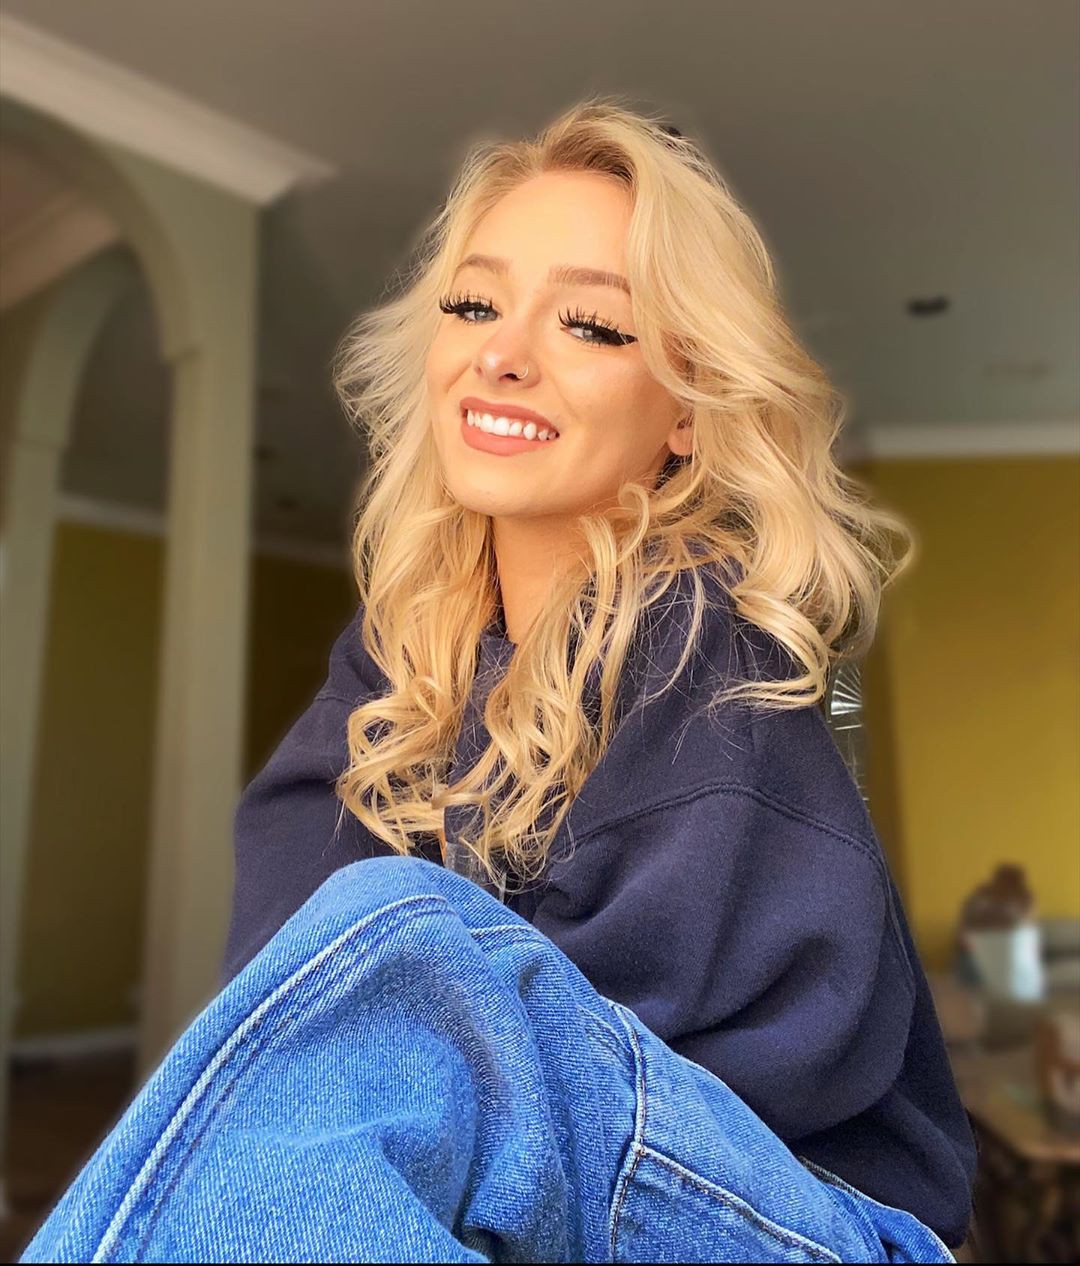 Zoe Laverne denim, jeans outfit stylevore, blond hairstyle: Denim,  Jeans Outfit,  Zoe Laverne TikTok  